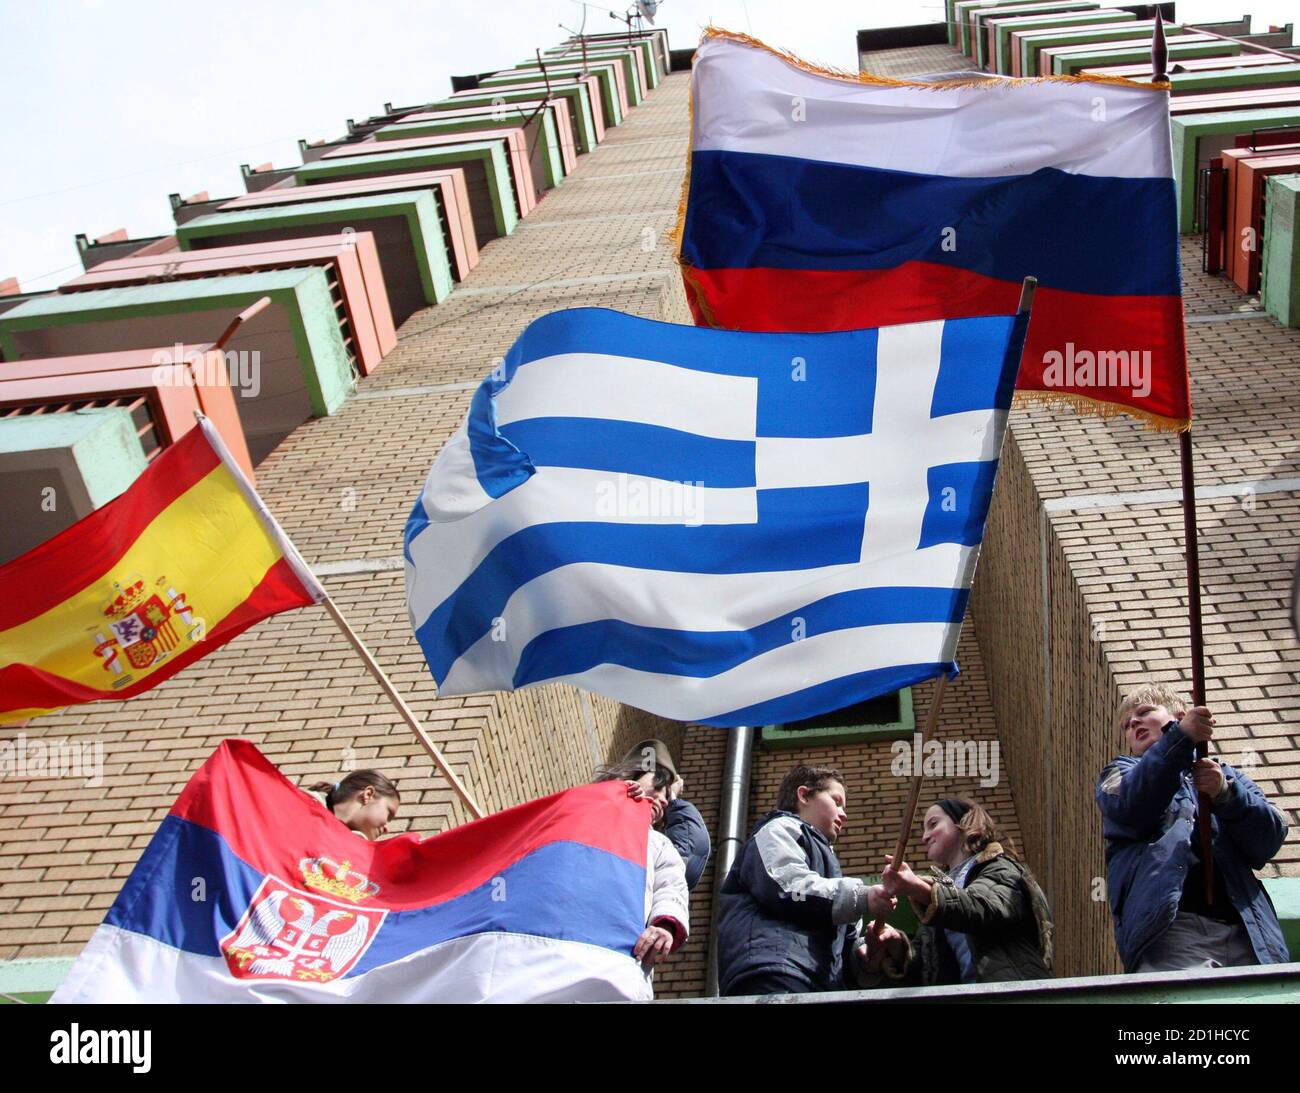 children-wave-flags-of-serbia-spain-greece-and-russia-during-a-protest-in-the-northern-part-of-mitrovica-march-25-2008-spain-greece-and-russia-are-among-the-countries-which-are-not-recognizing-kosovos-independence-reuters-nebojsa-markovic-serbia-2d1hcyc.jpg